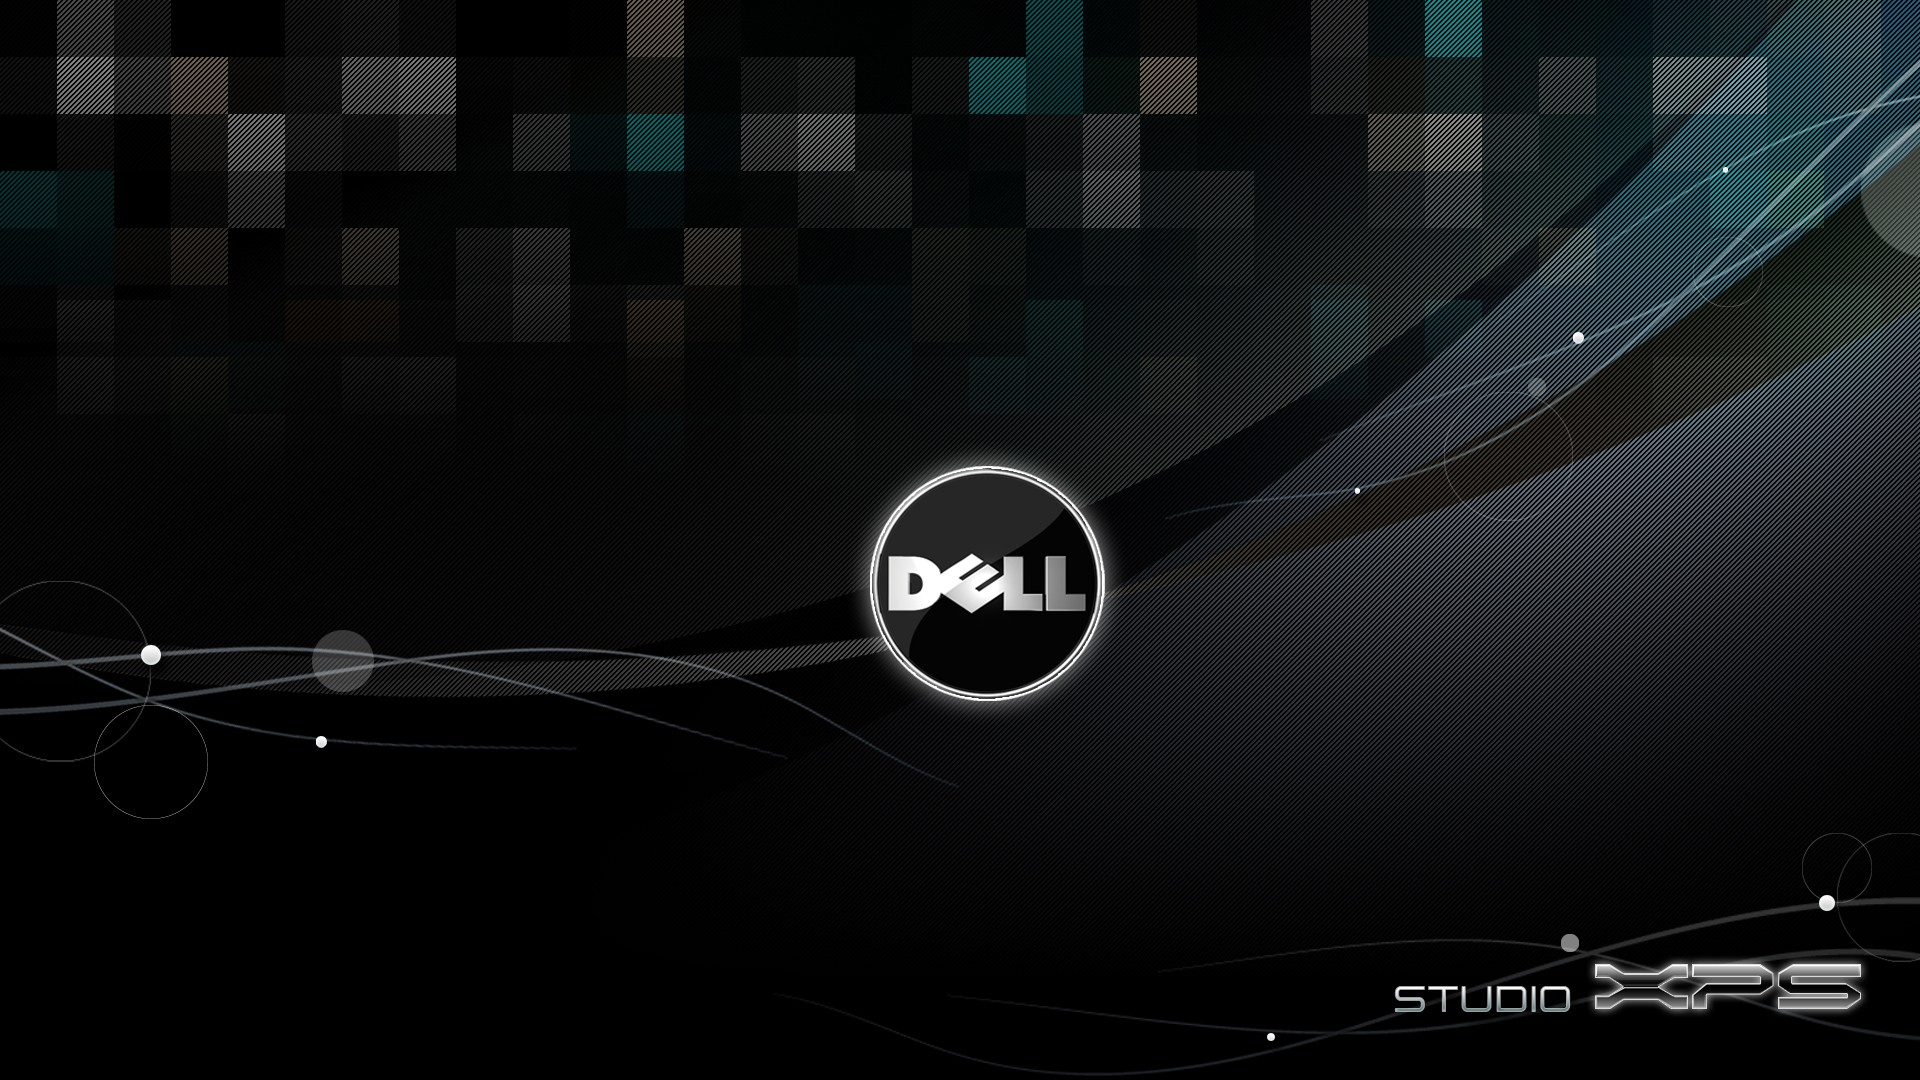 General 1920x1080 computer hardware Dell technology logo